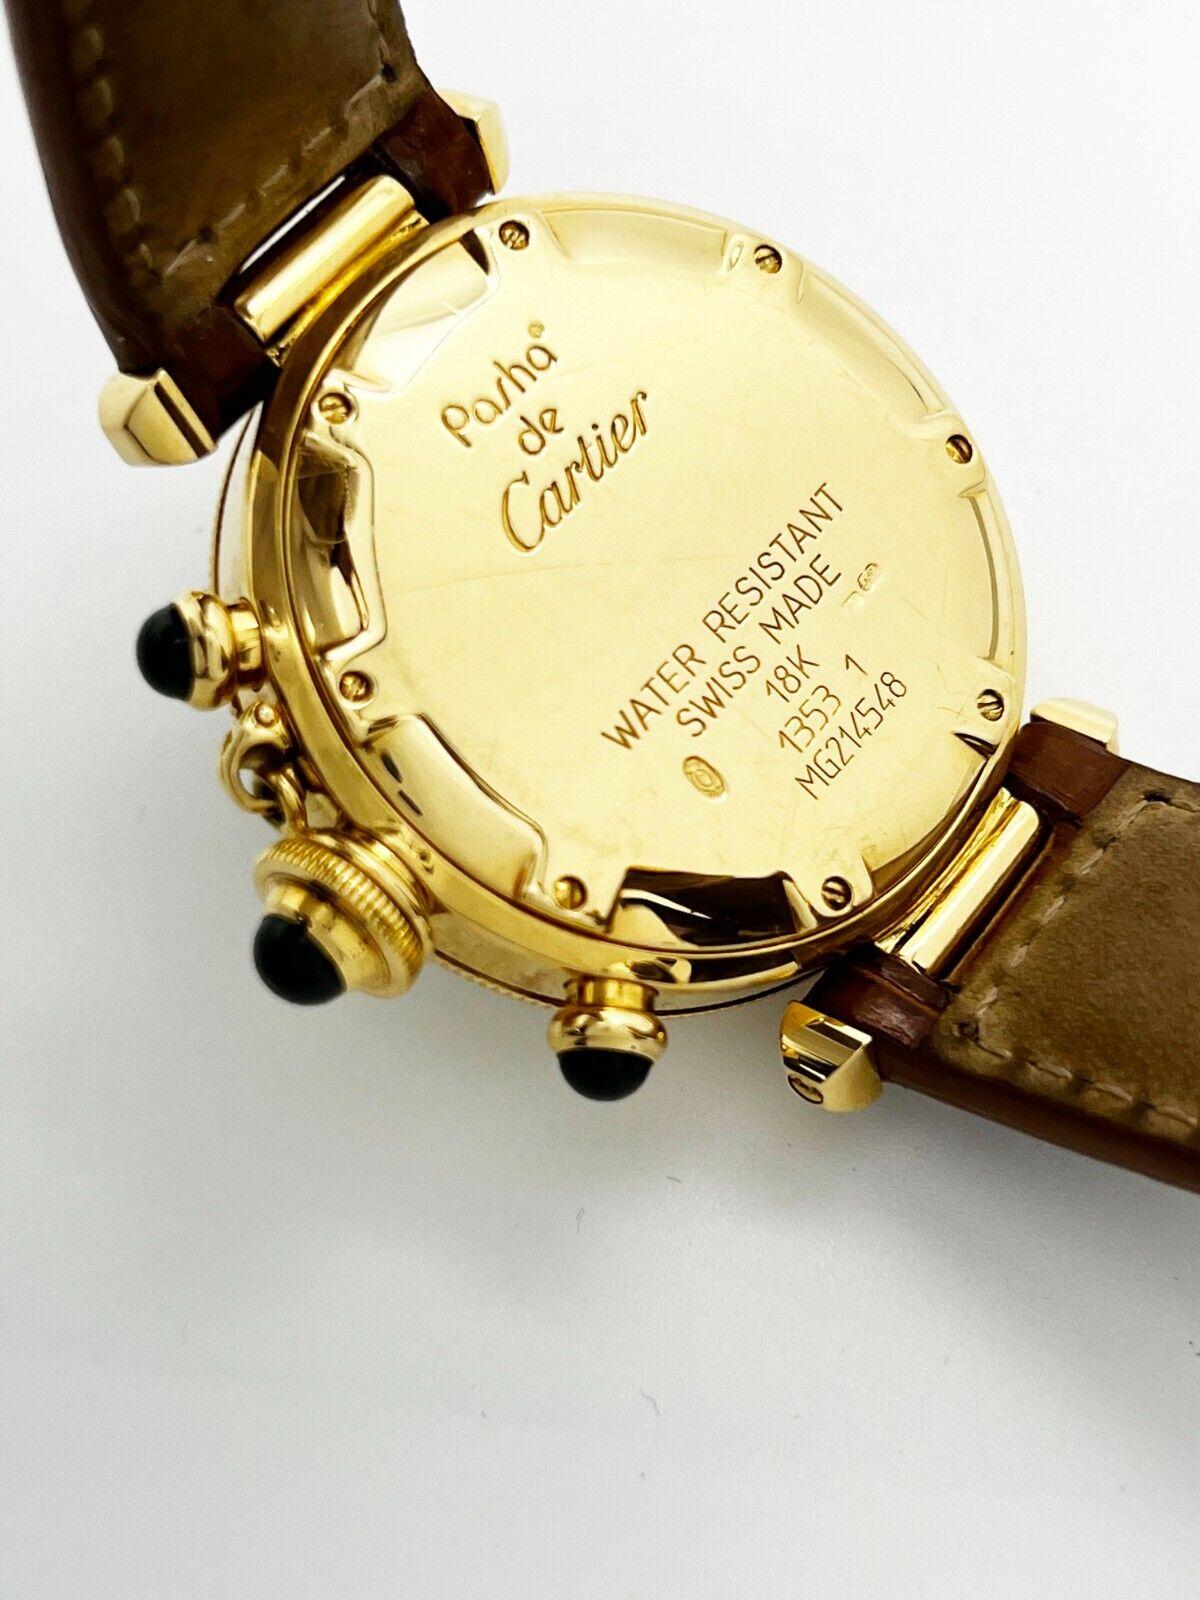 Cartier Pasha Ref 1353 Chronograph 18K Yellow Gold 35mm Leather Strap For Sale 5